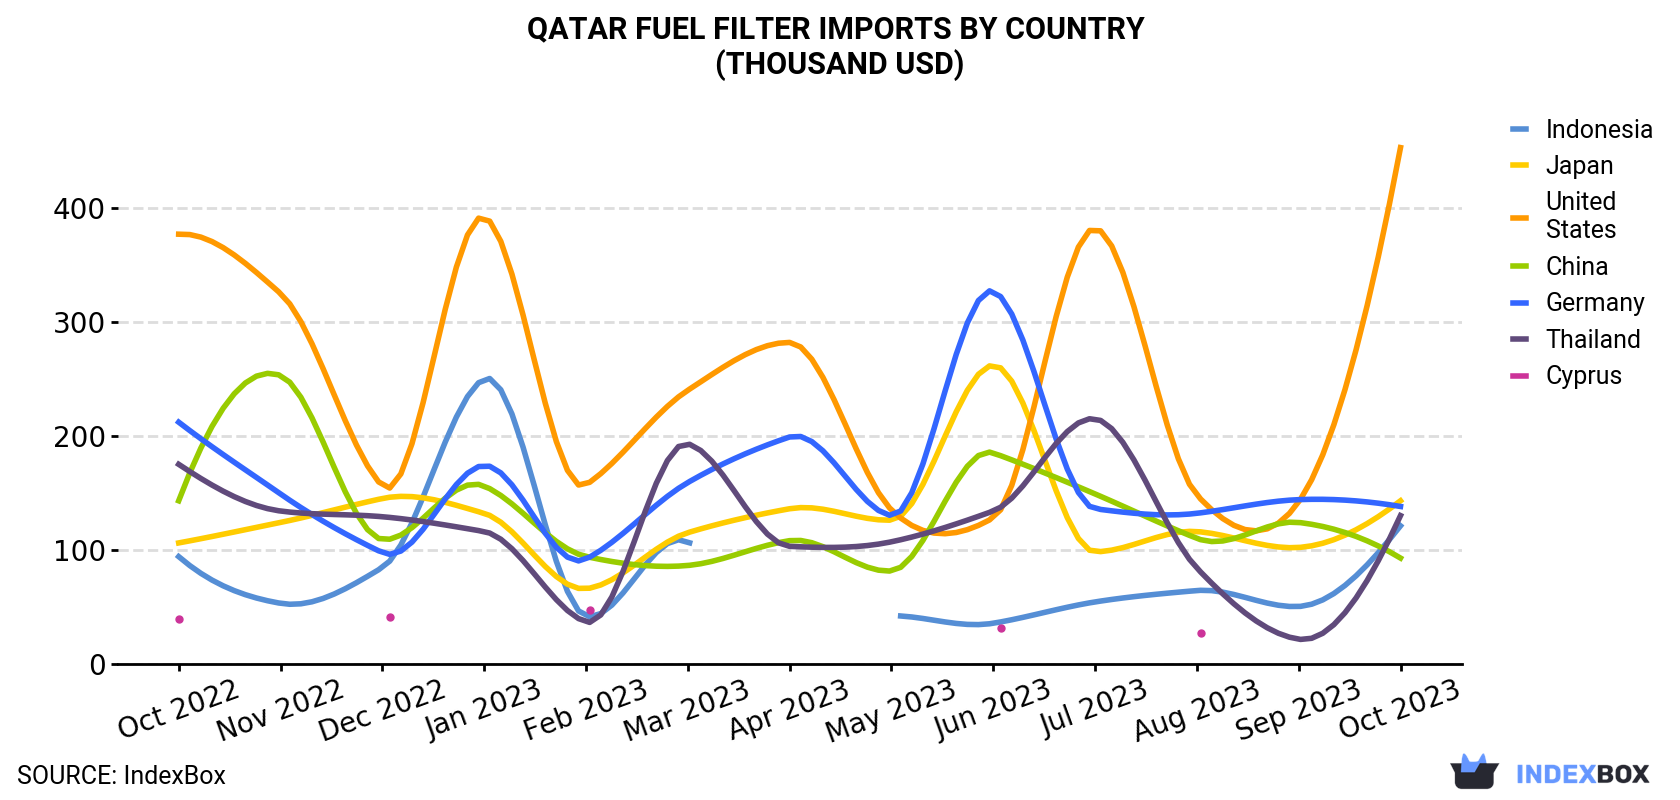 Qatar Fuel Filter Imports By Country (Thousand USD)